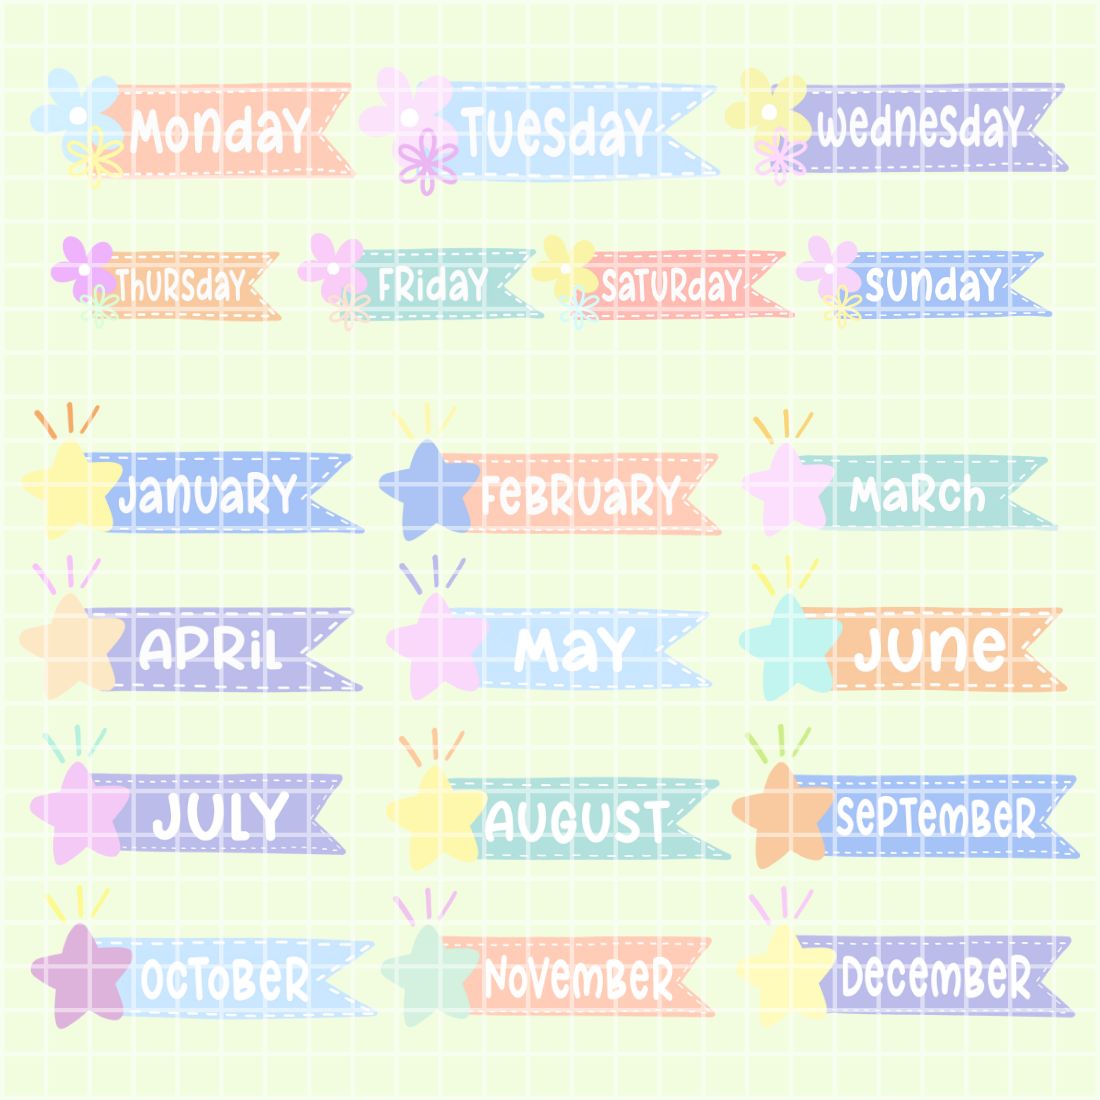 The months of the year are shown in pastel colors.